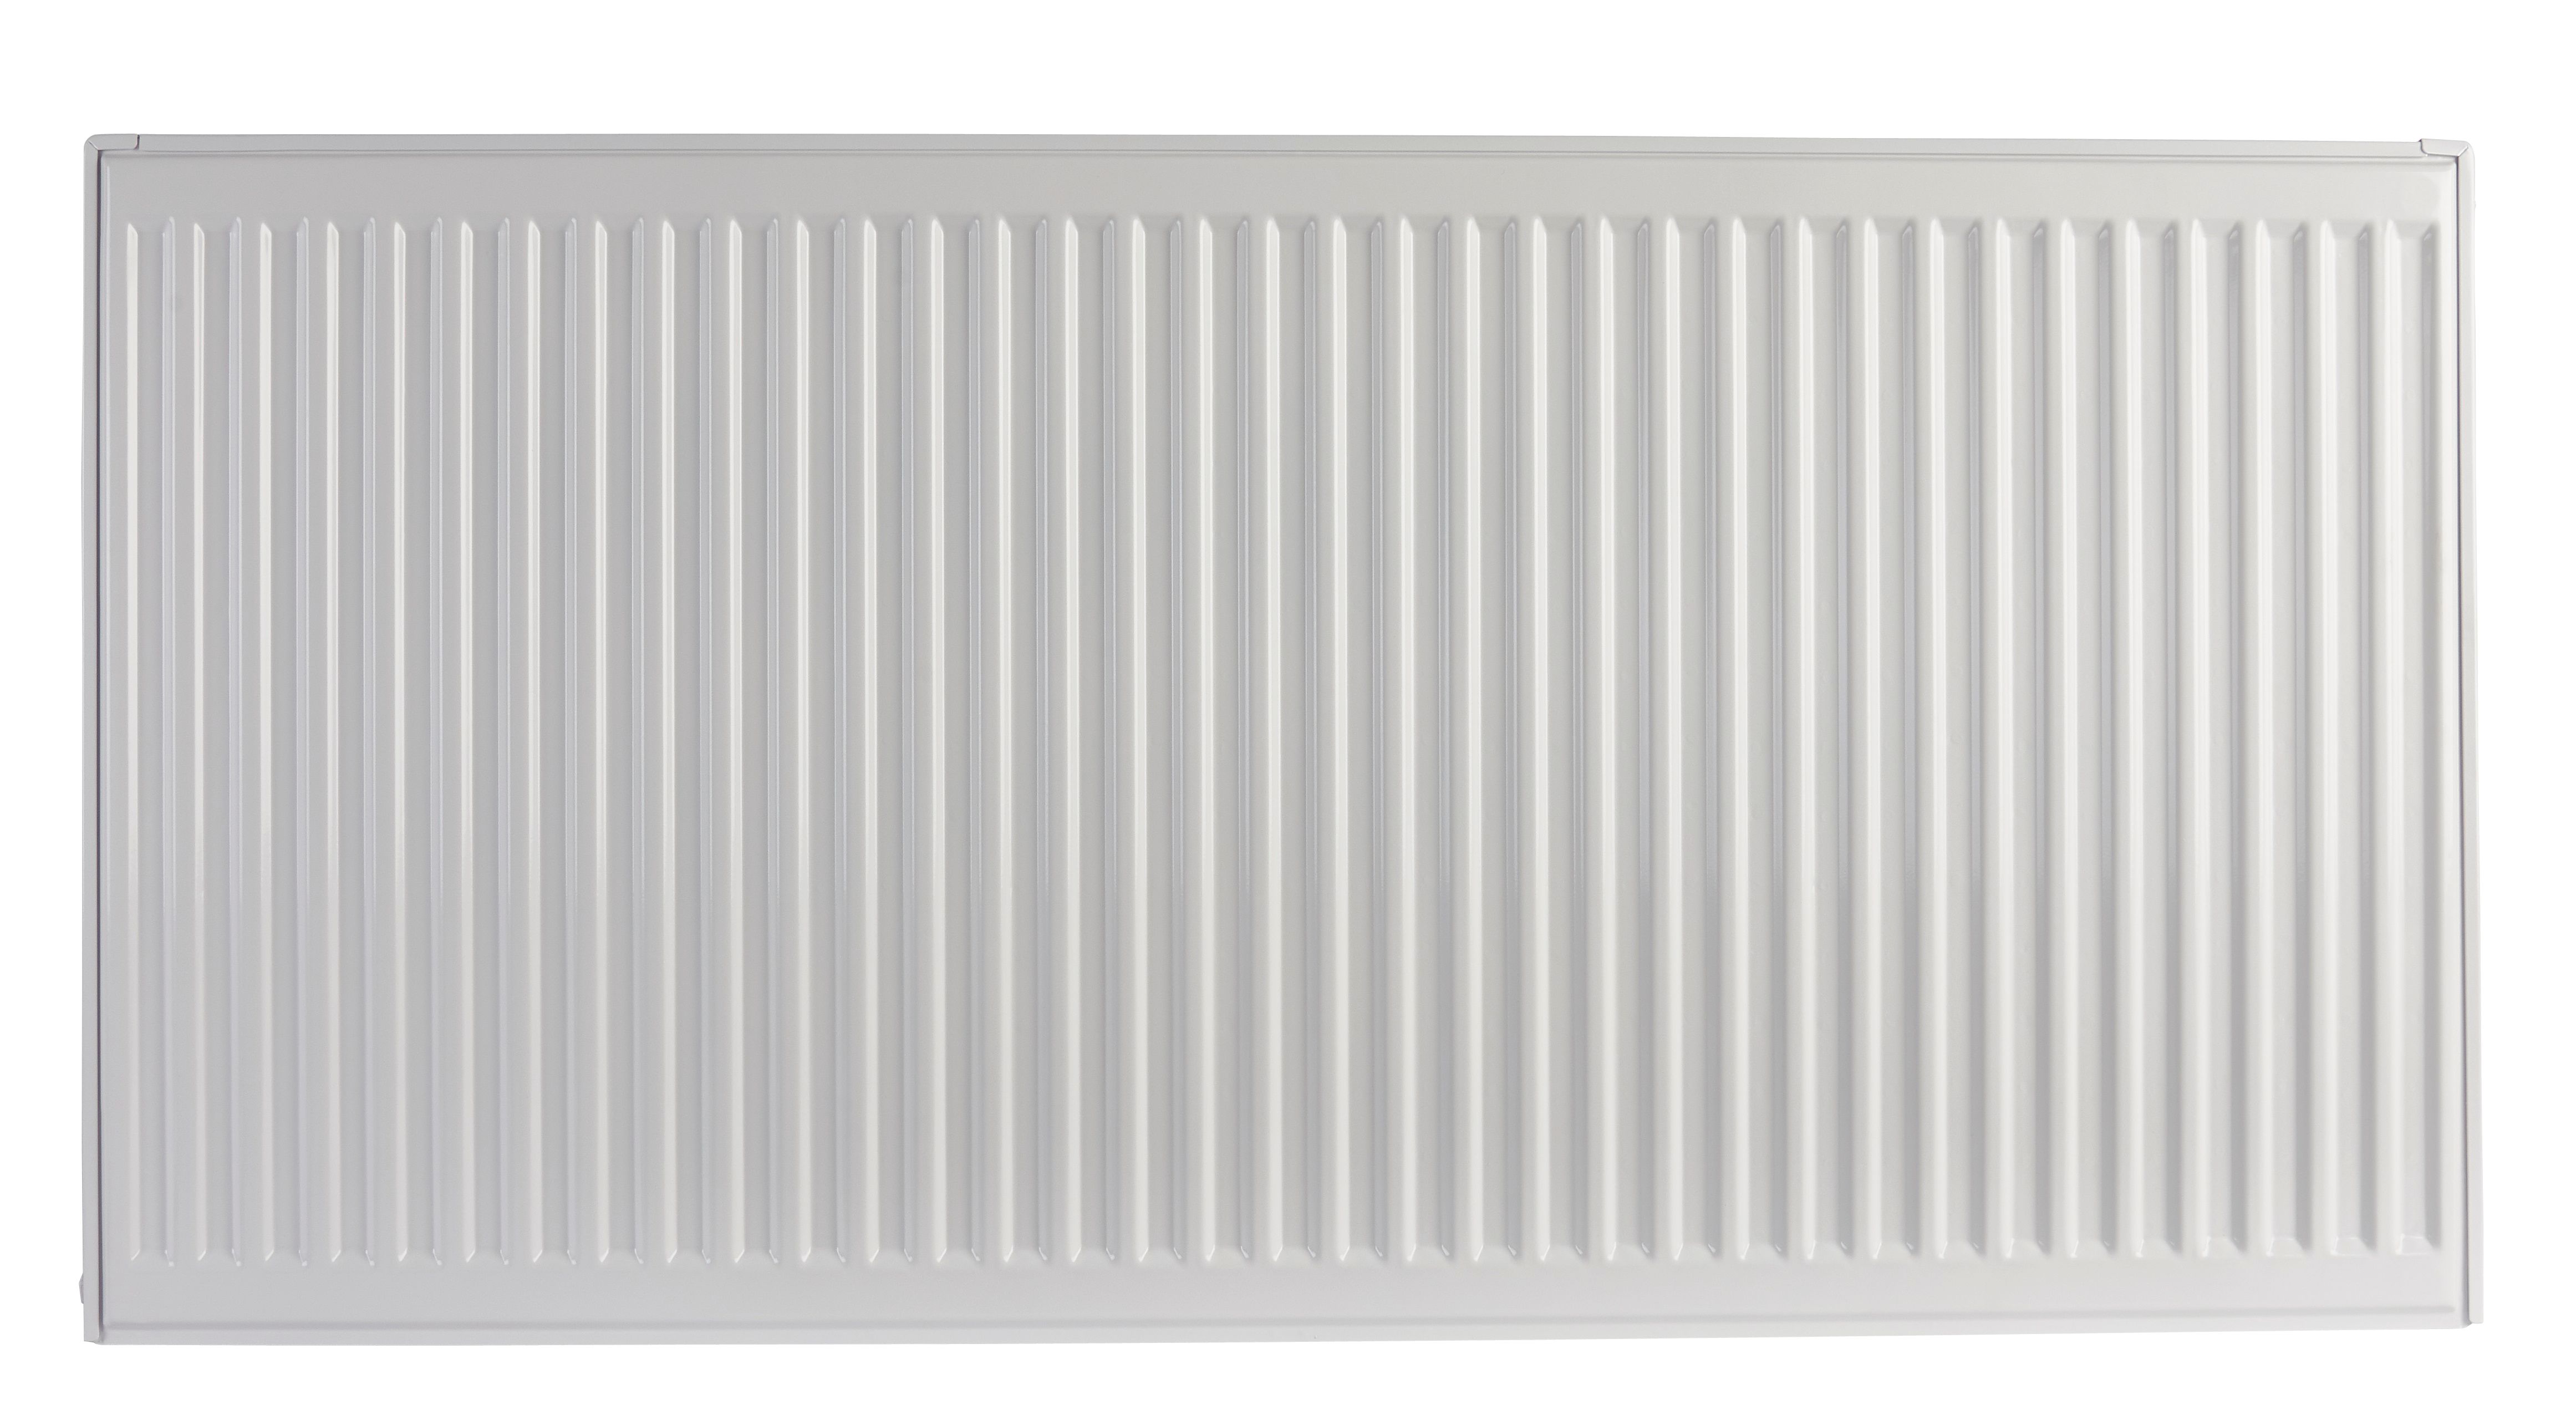 Image of Homeline by Stelrad 500 x 1000mm Type 21 Double Panel Plus Single Convector Radiator